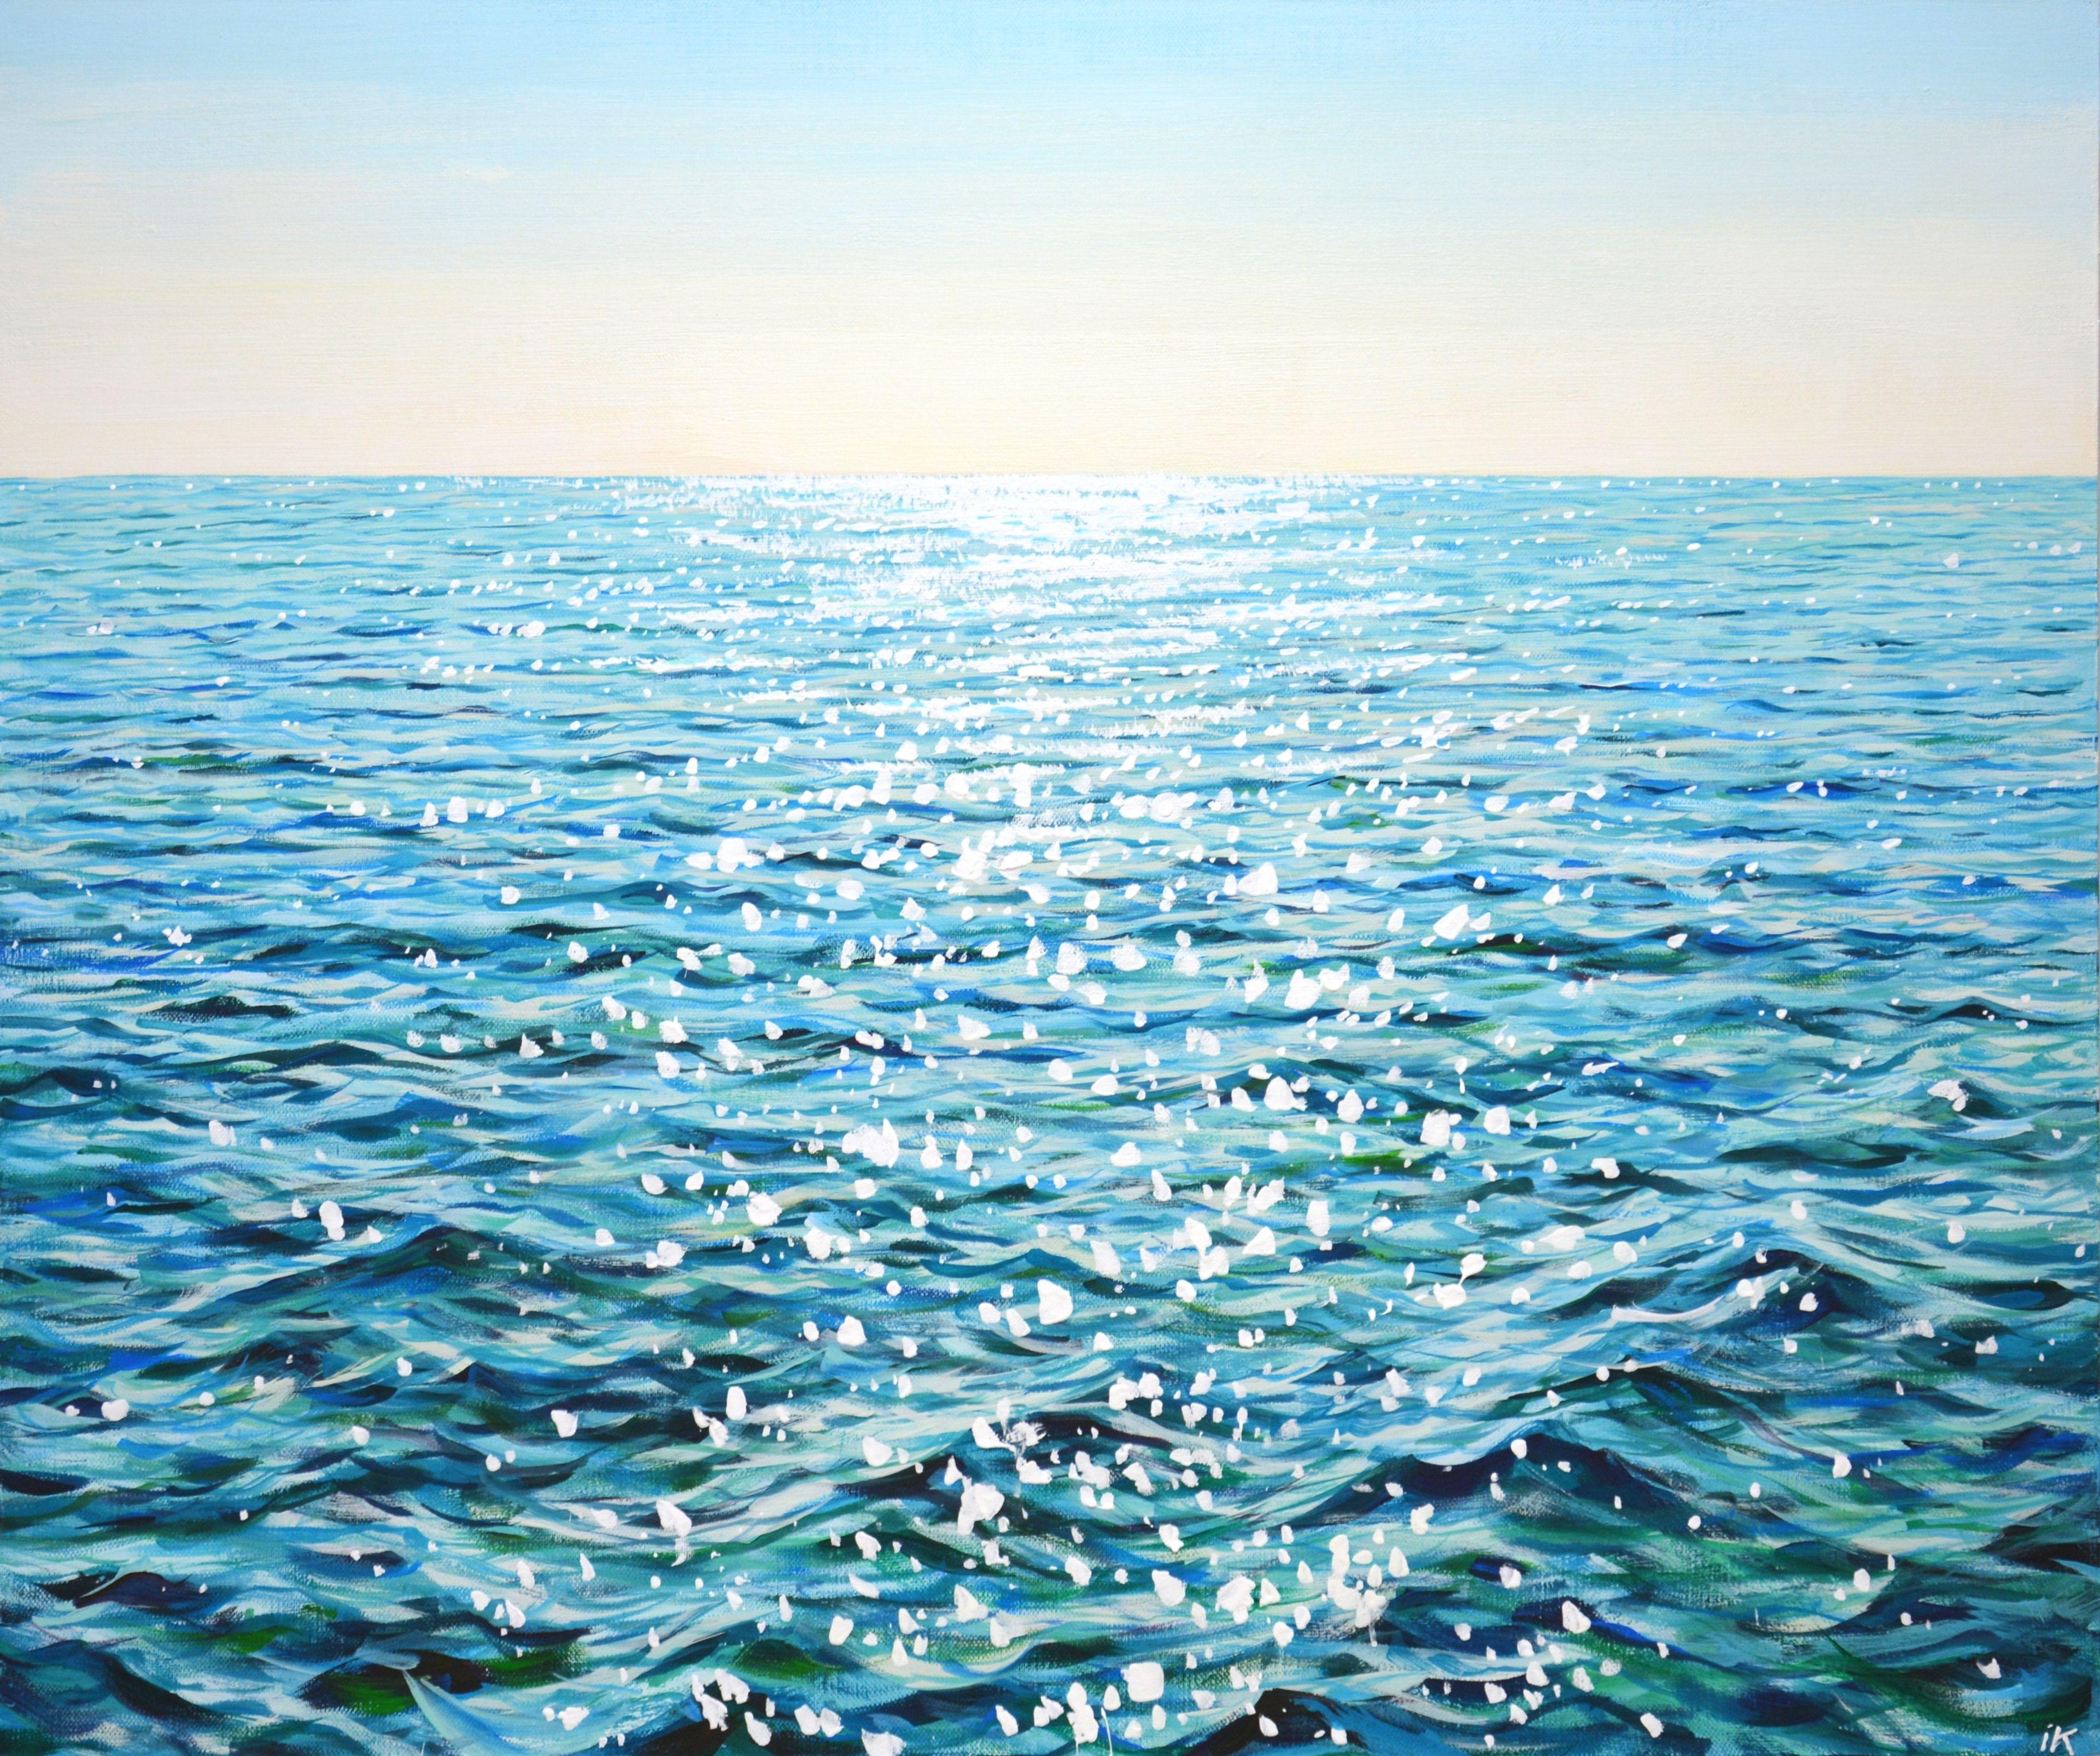 Glowing ocean waves. Blue water, clear skies, waves, serene views, sun glare on the water create an atmosphere of relaxation and romance. Made in the style of realism, turquoise, blue, white palette emphasizes the energy of water. Part of a